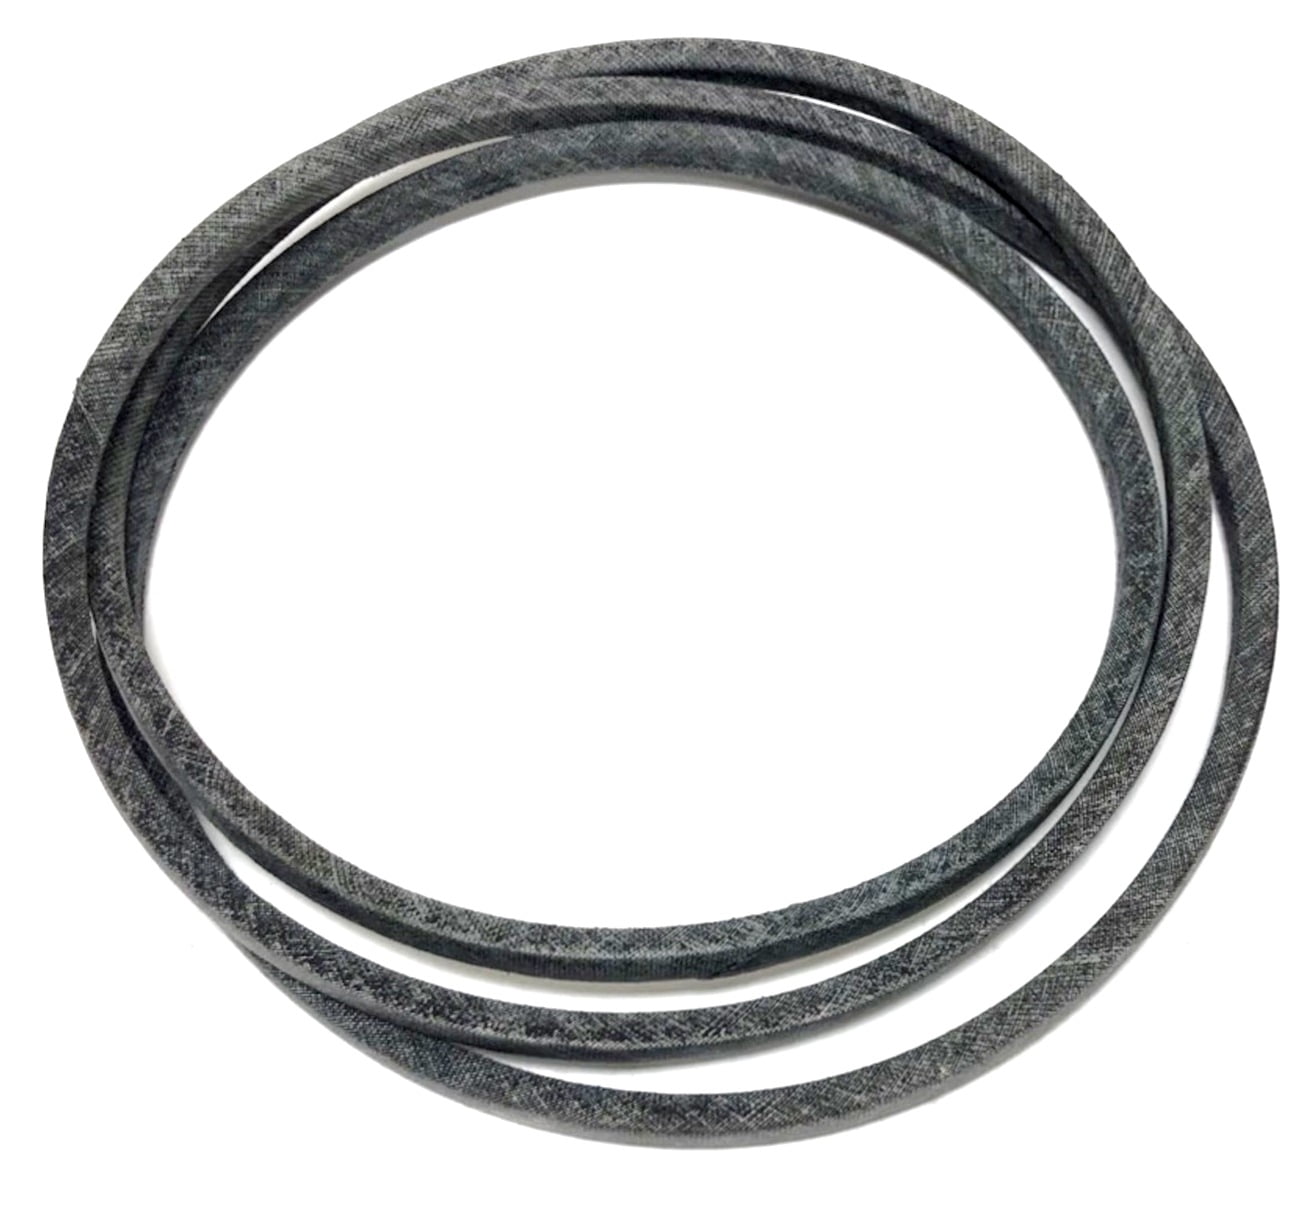 SEARS or ROPER or AYP 41740 made with Kevlar Replacement Belt 